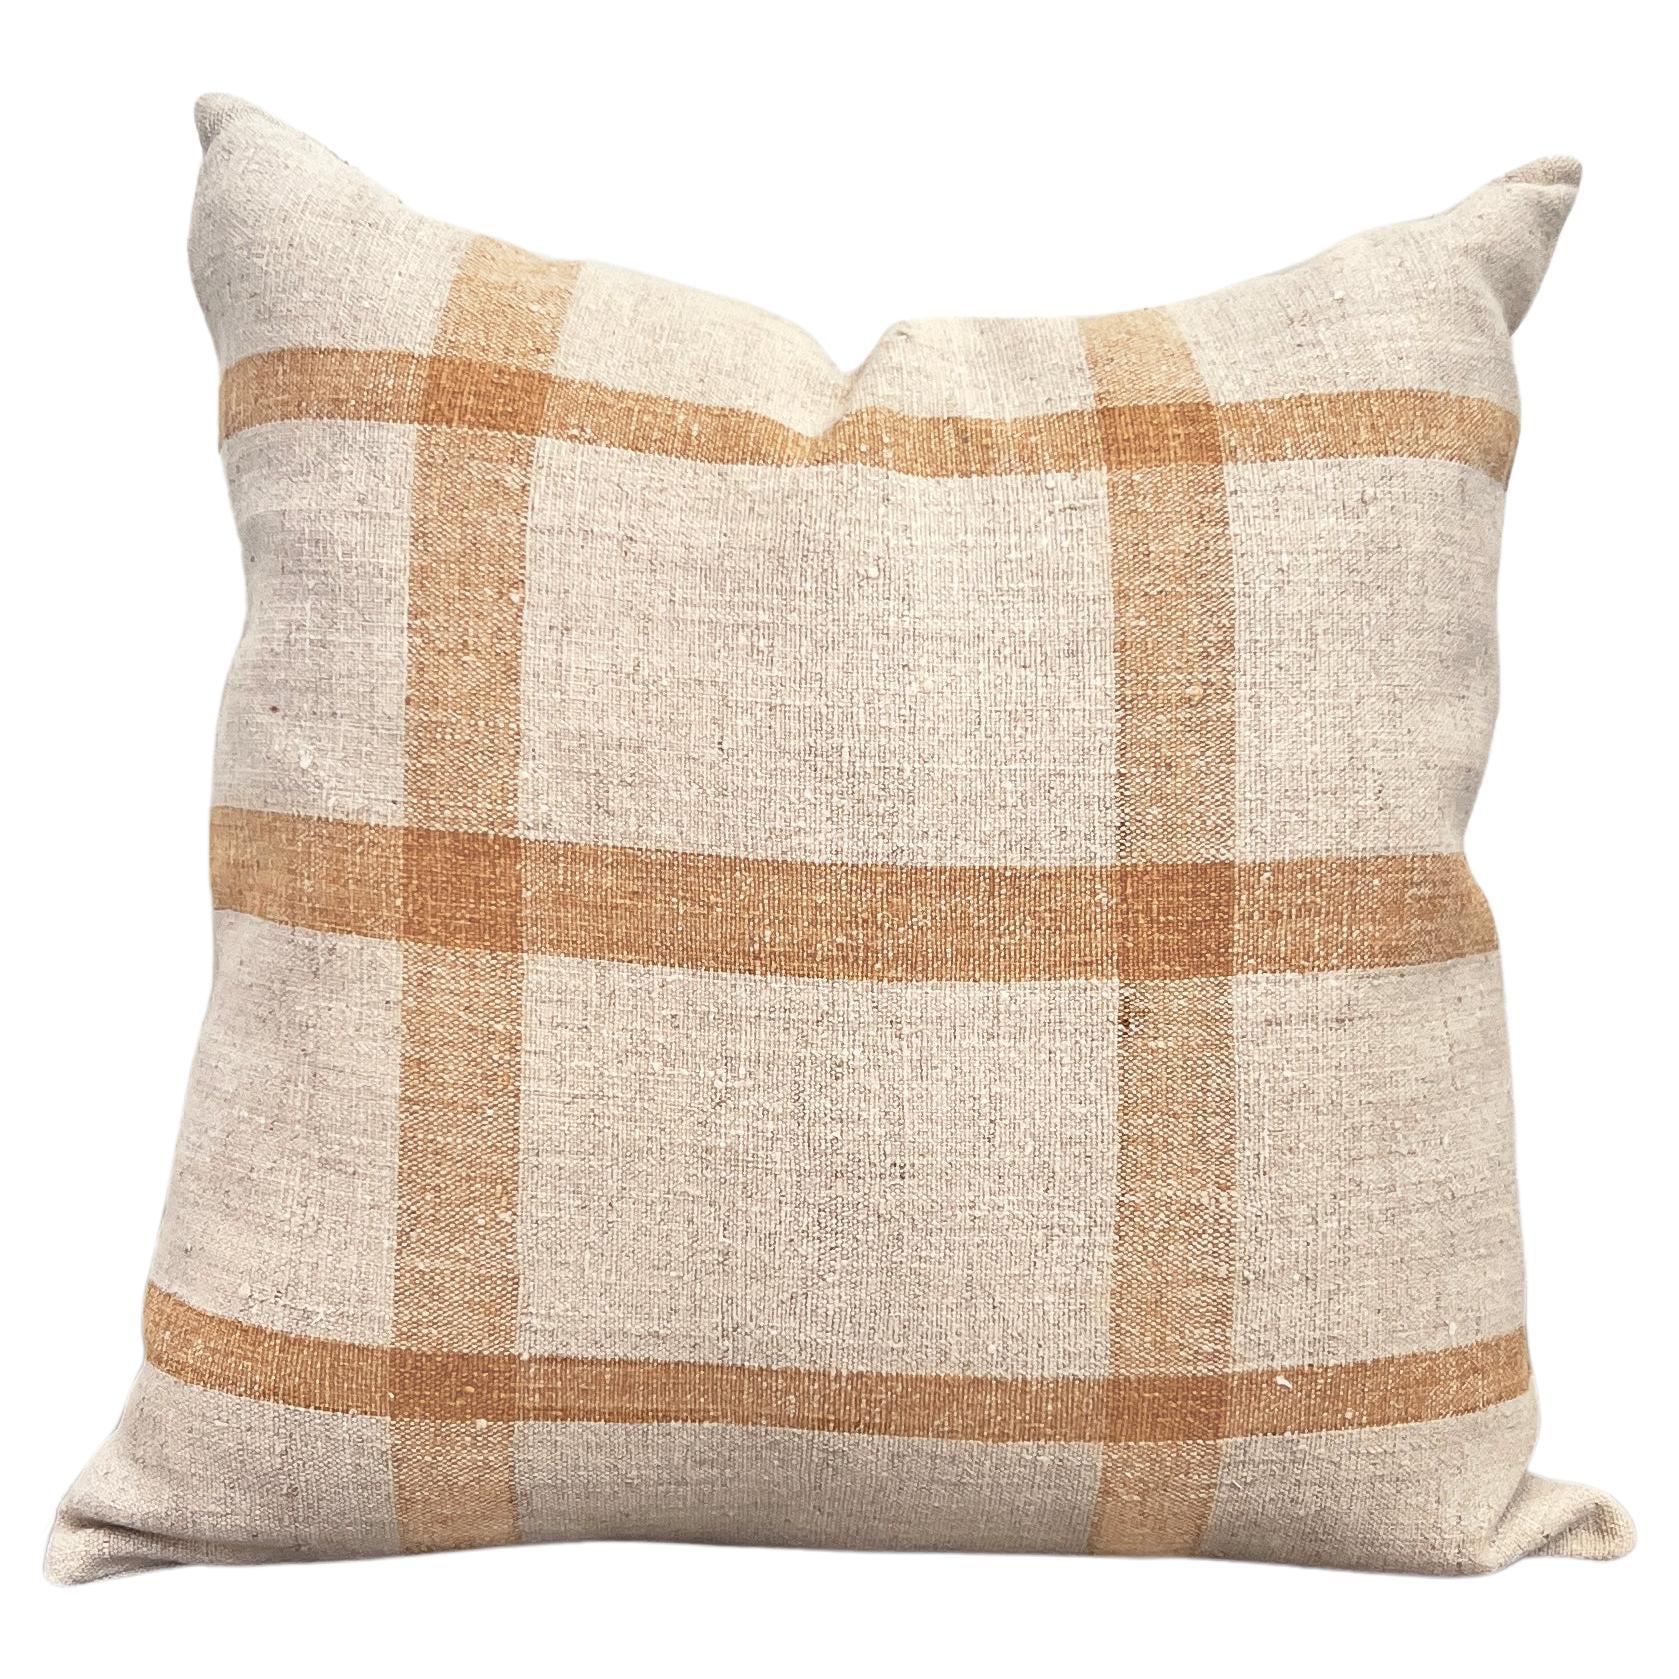 Matilde Mustard Checkered Square Throw Pillow made from Vintage Linen For Sale